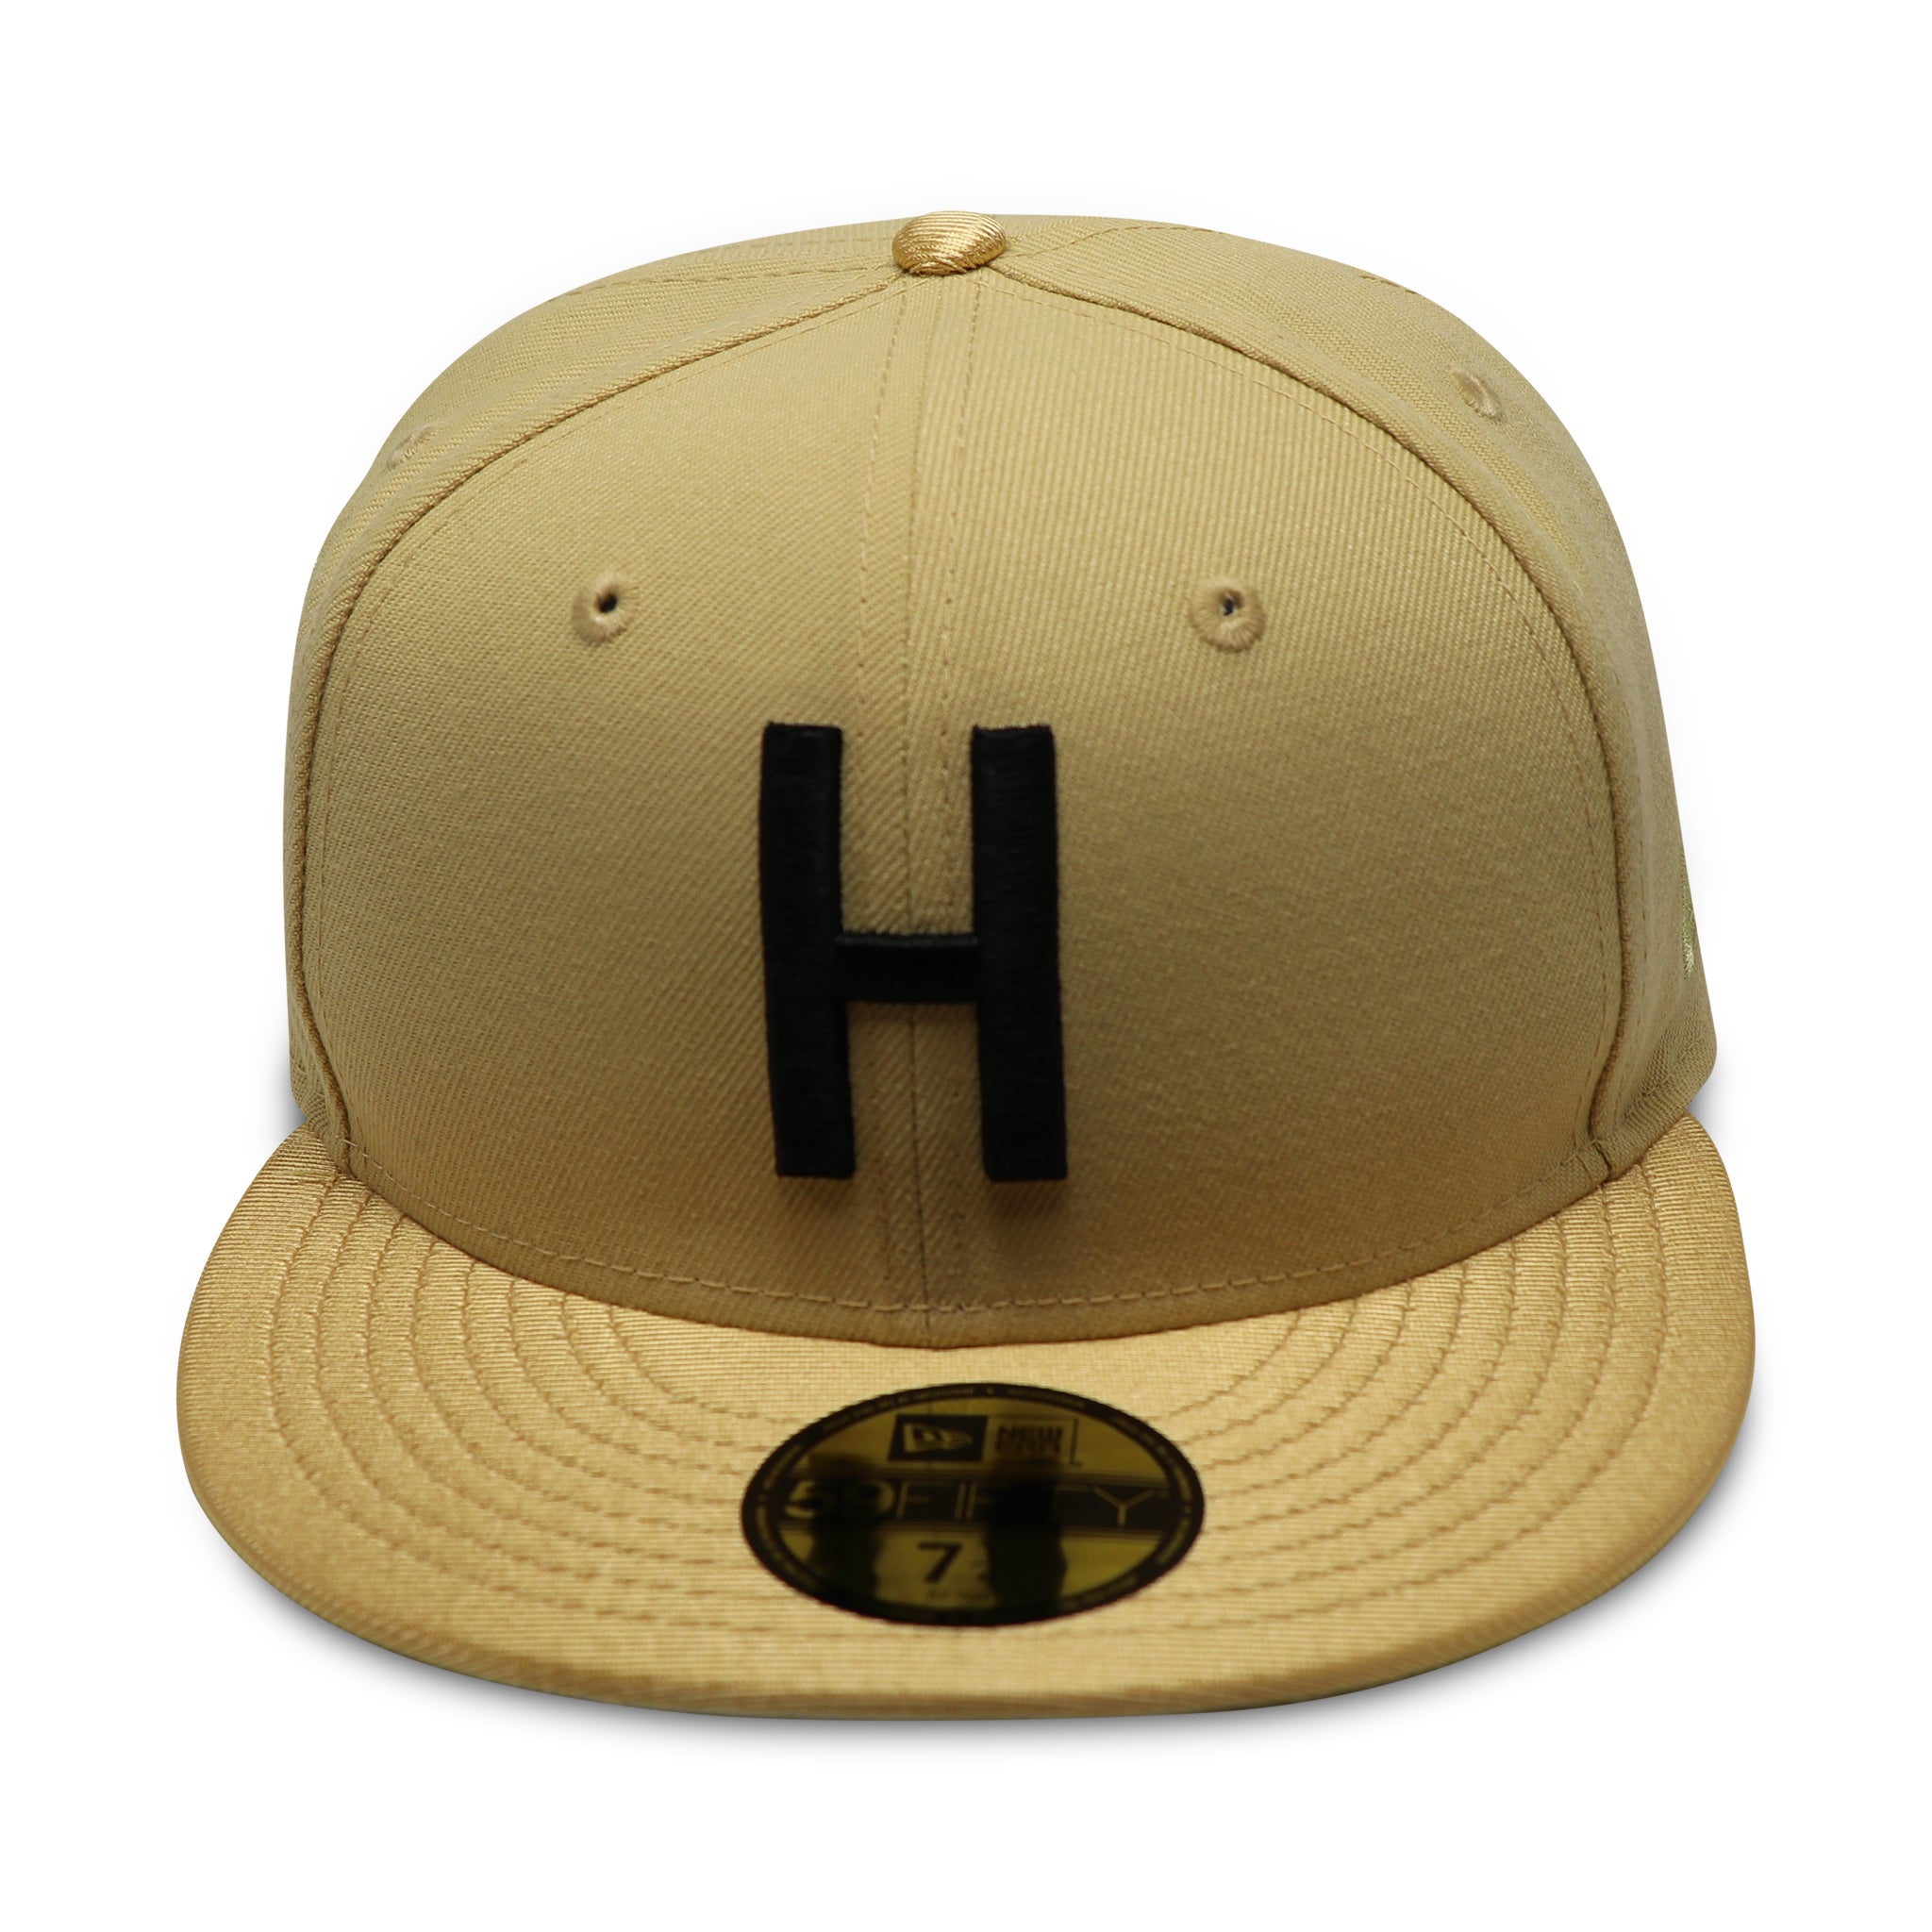 HILLSDALE GIANTS (100TH ANN "NEGRO LEAGUE") NEW ERA 59FIFTY FITTED (CROME UNDER VISOR) (W)